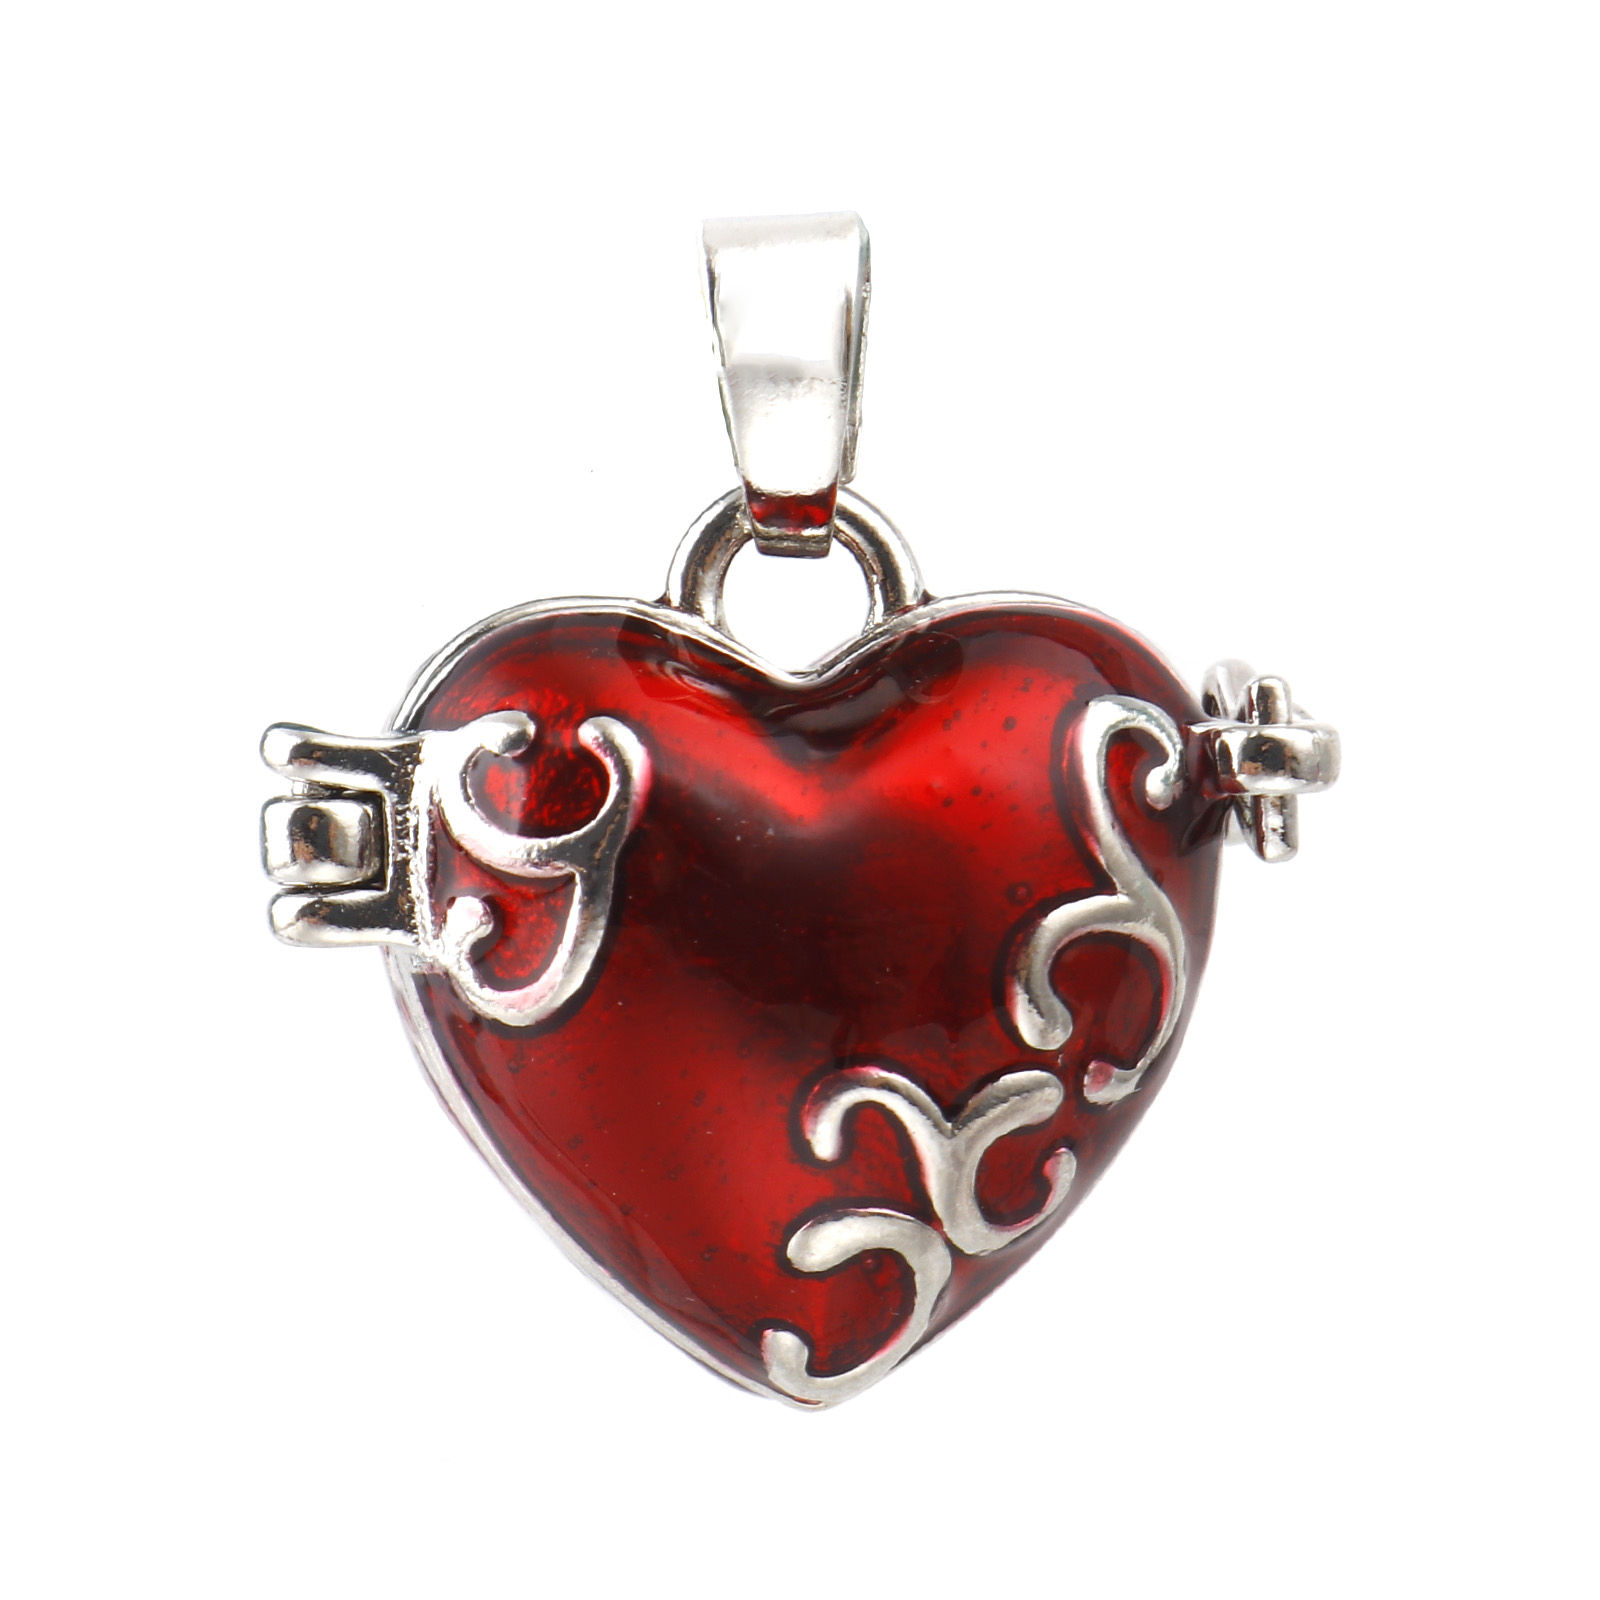 Picture of Copper Charms Mexican Angel Caller Bola Harmony Ball Wish Box Locket Heart Carved Pattern Silver Tone Red Enamel Can Open 25mm x 21mm, 1 Piece